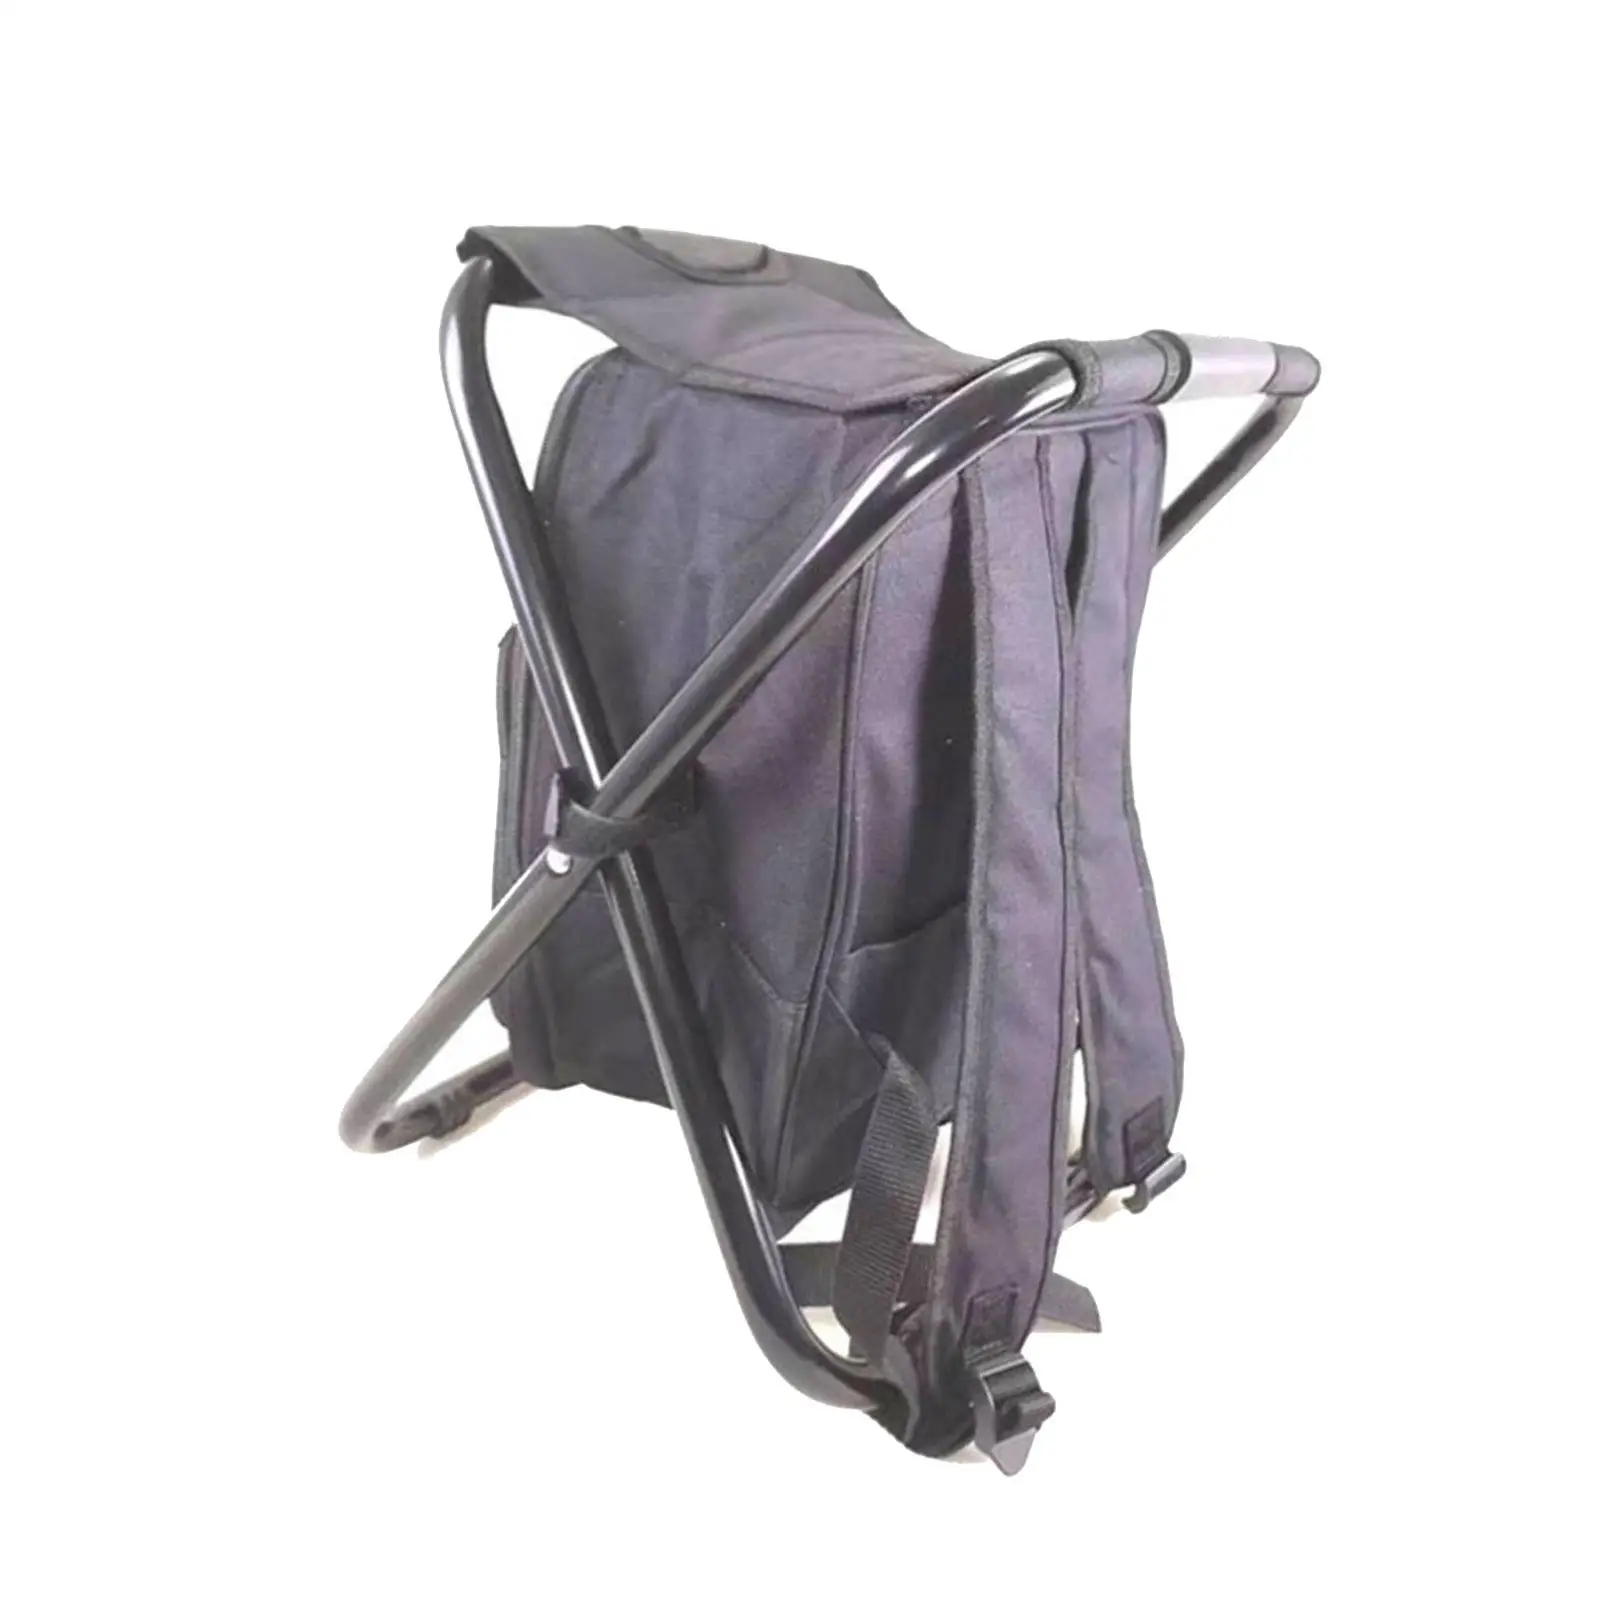 Backpack Chairs Lightweight Camping Chair Fishing Seat Portable for Camping